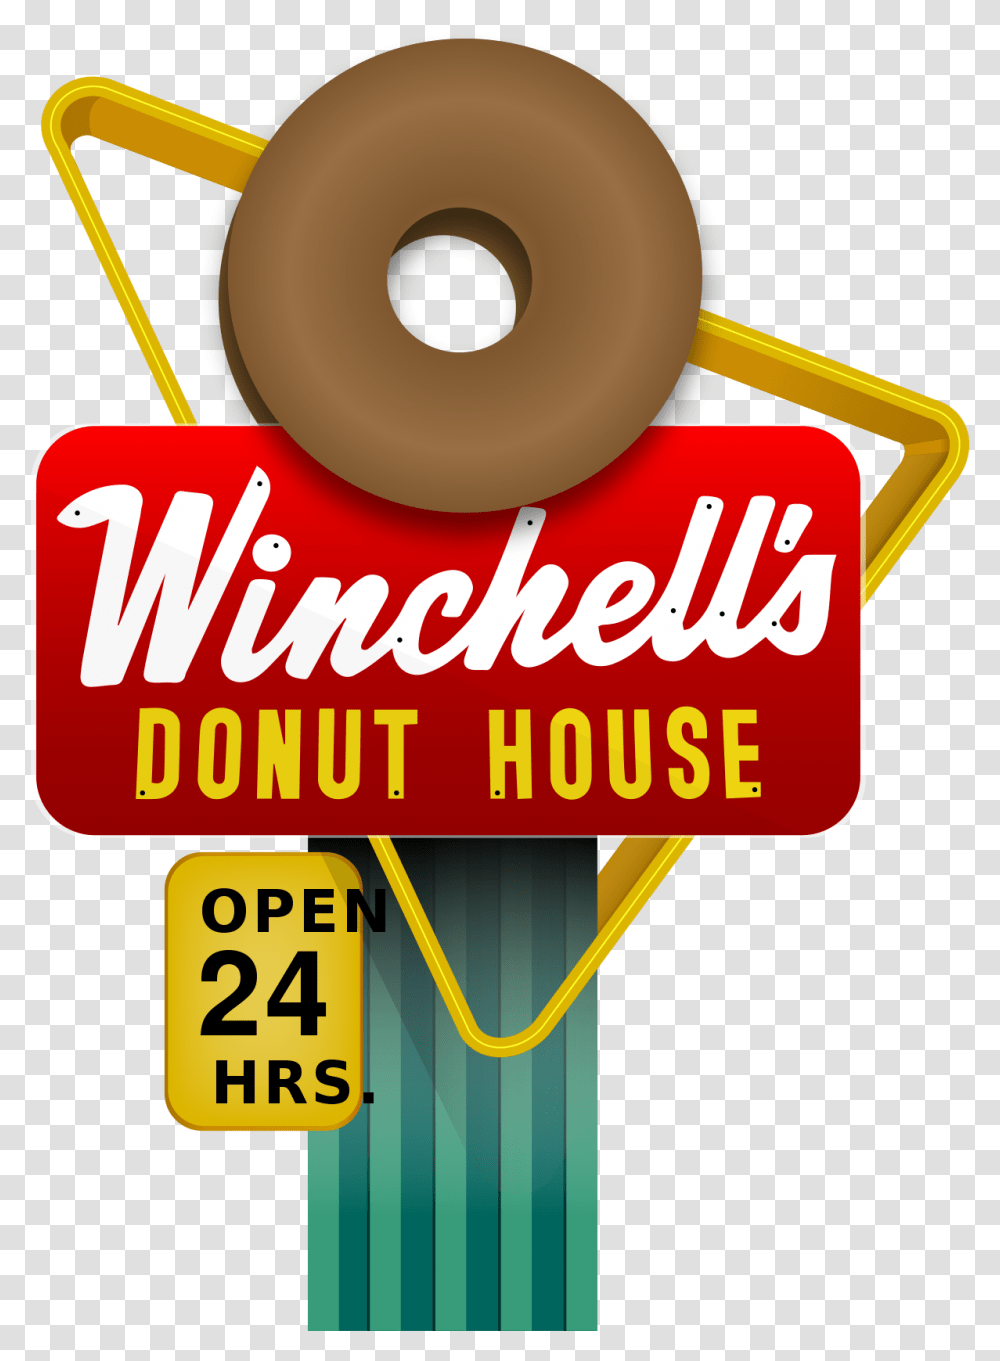 Winchells Donuts Donut Companies, Pastry, Dessert, Food, Text Transparent Png